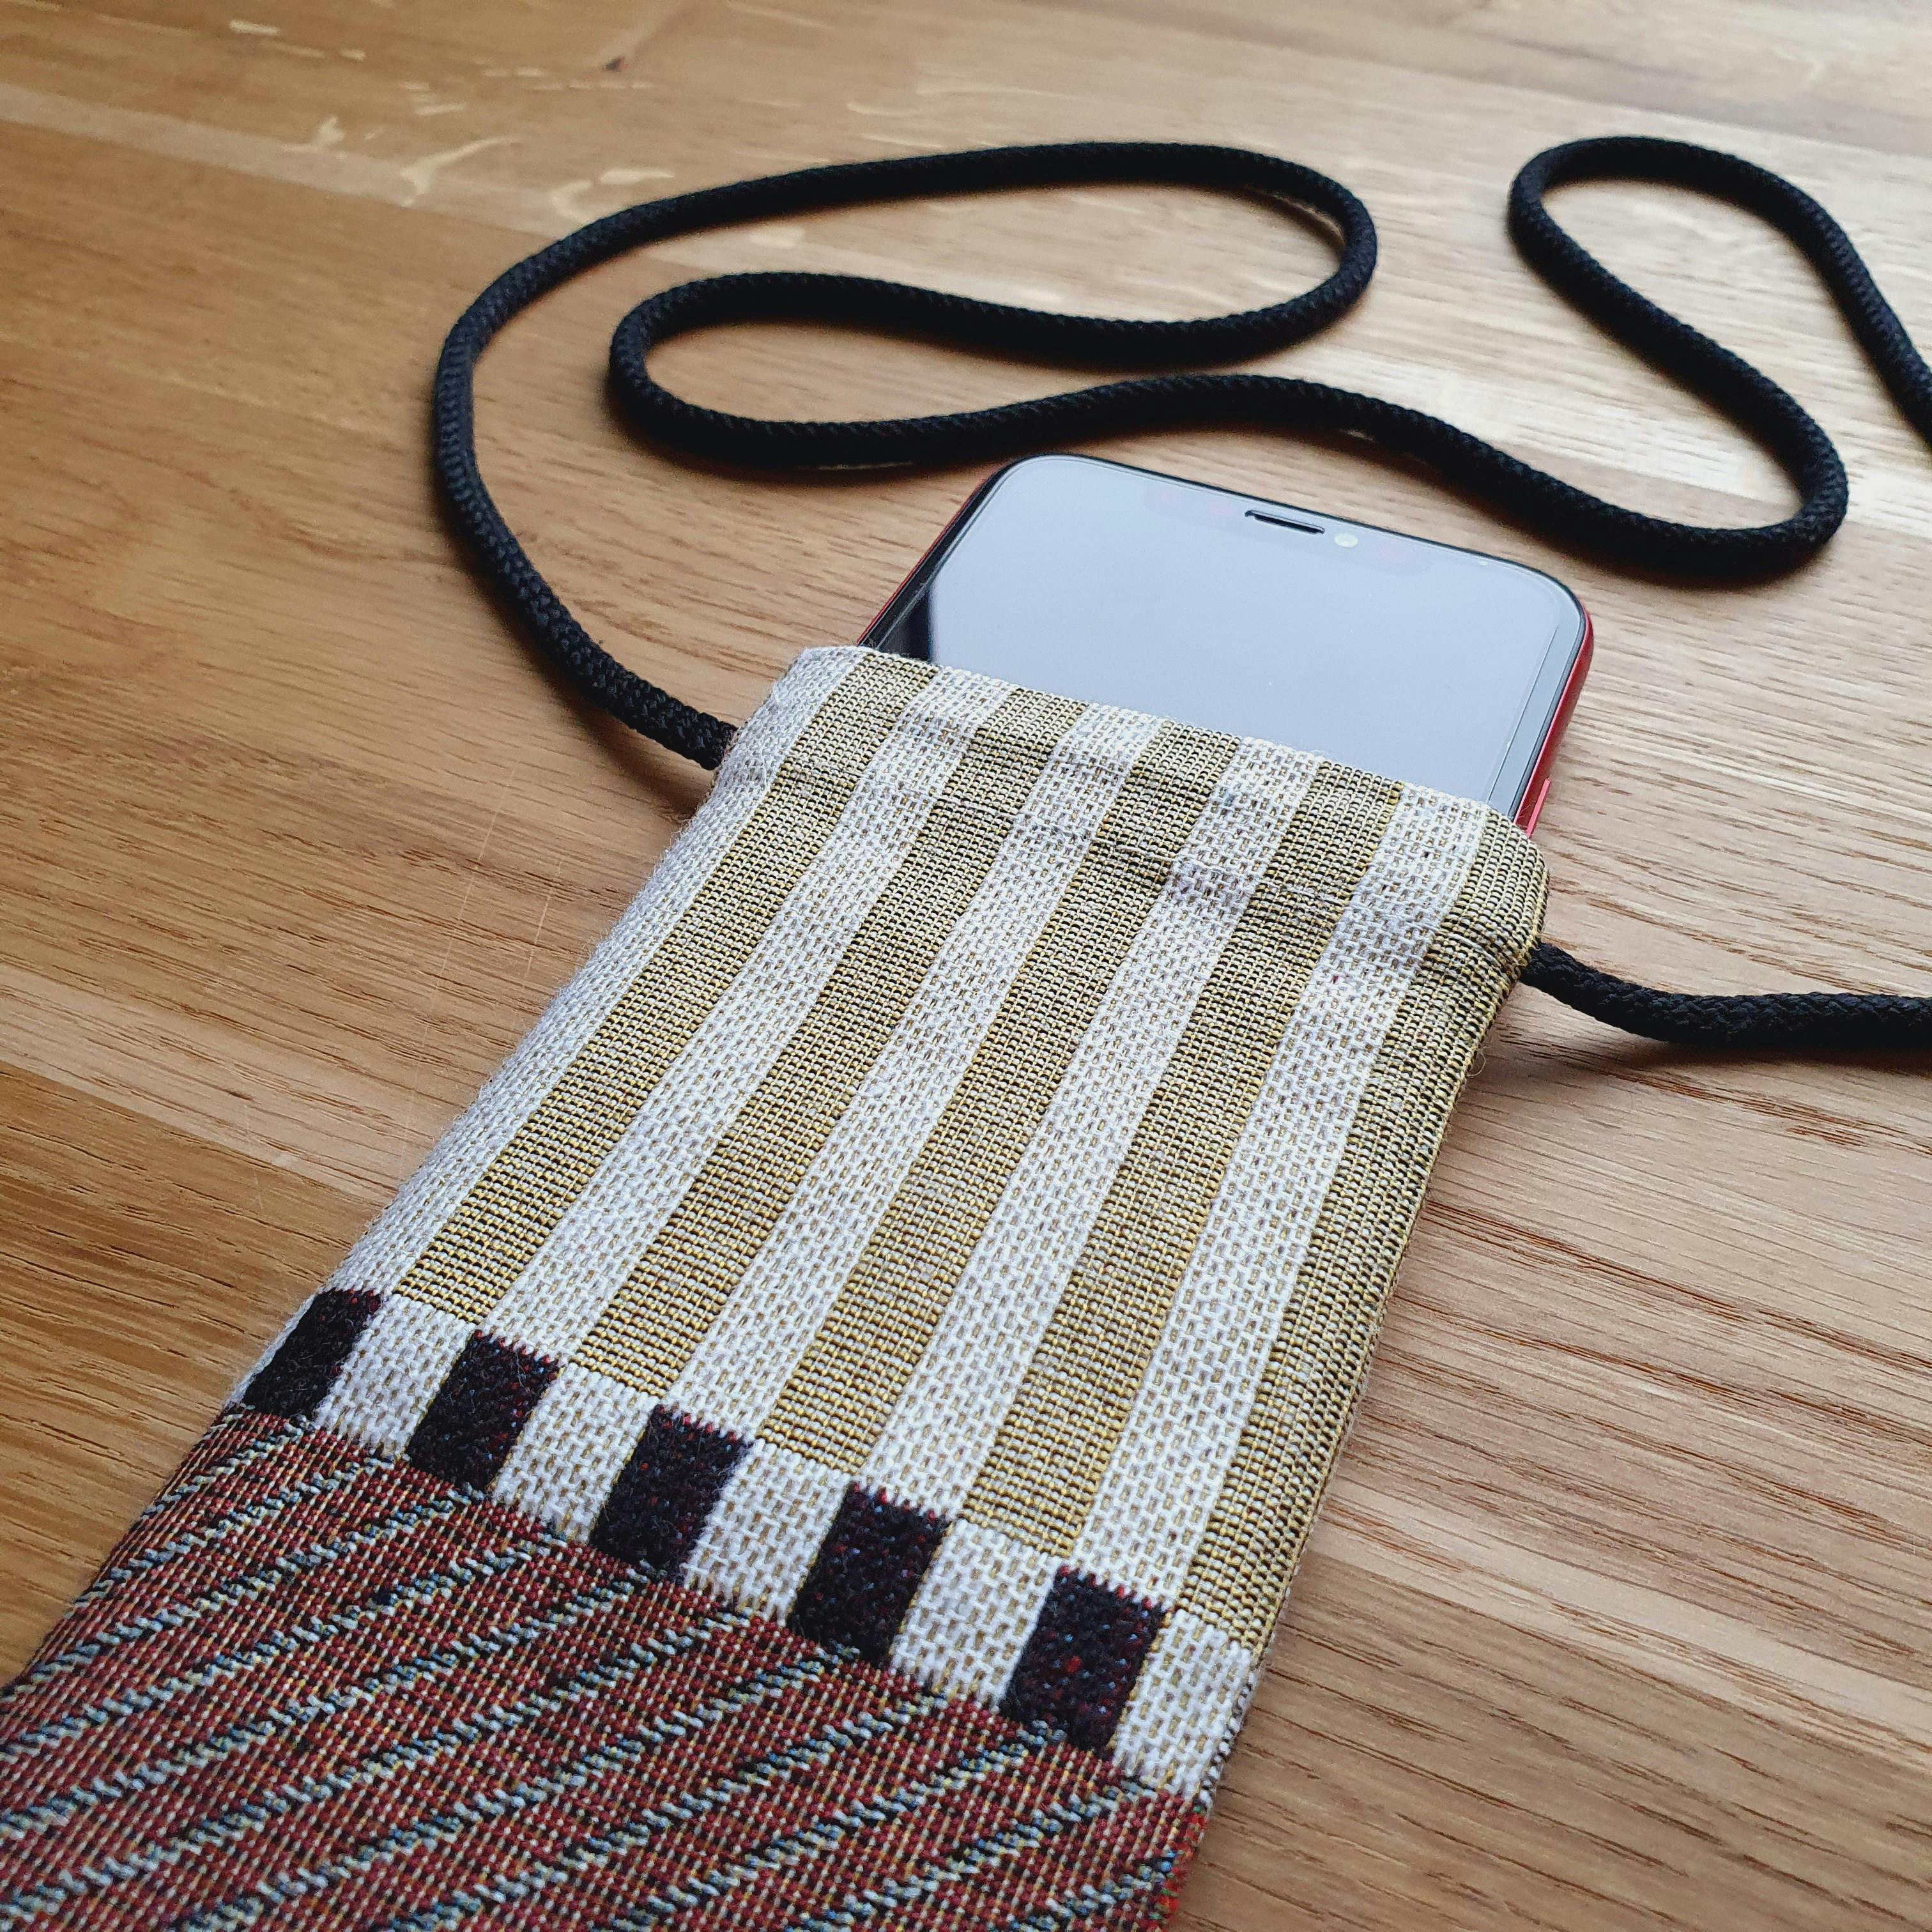 handmade smartphone sleeve with cord for wearing